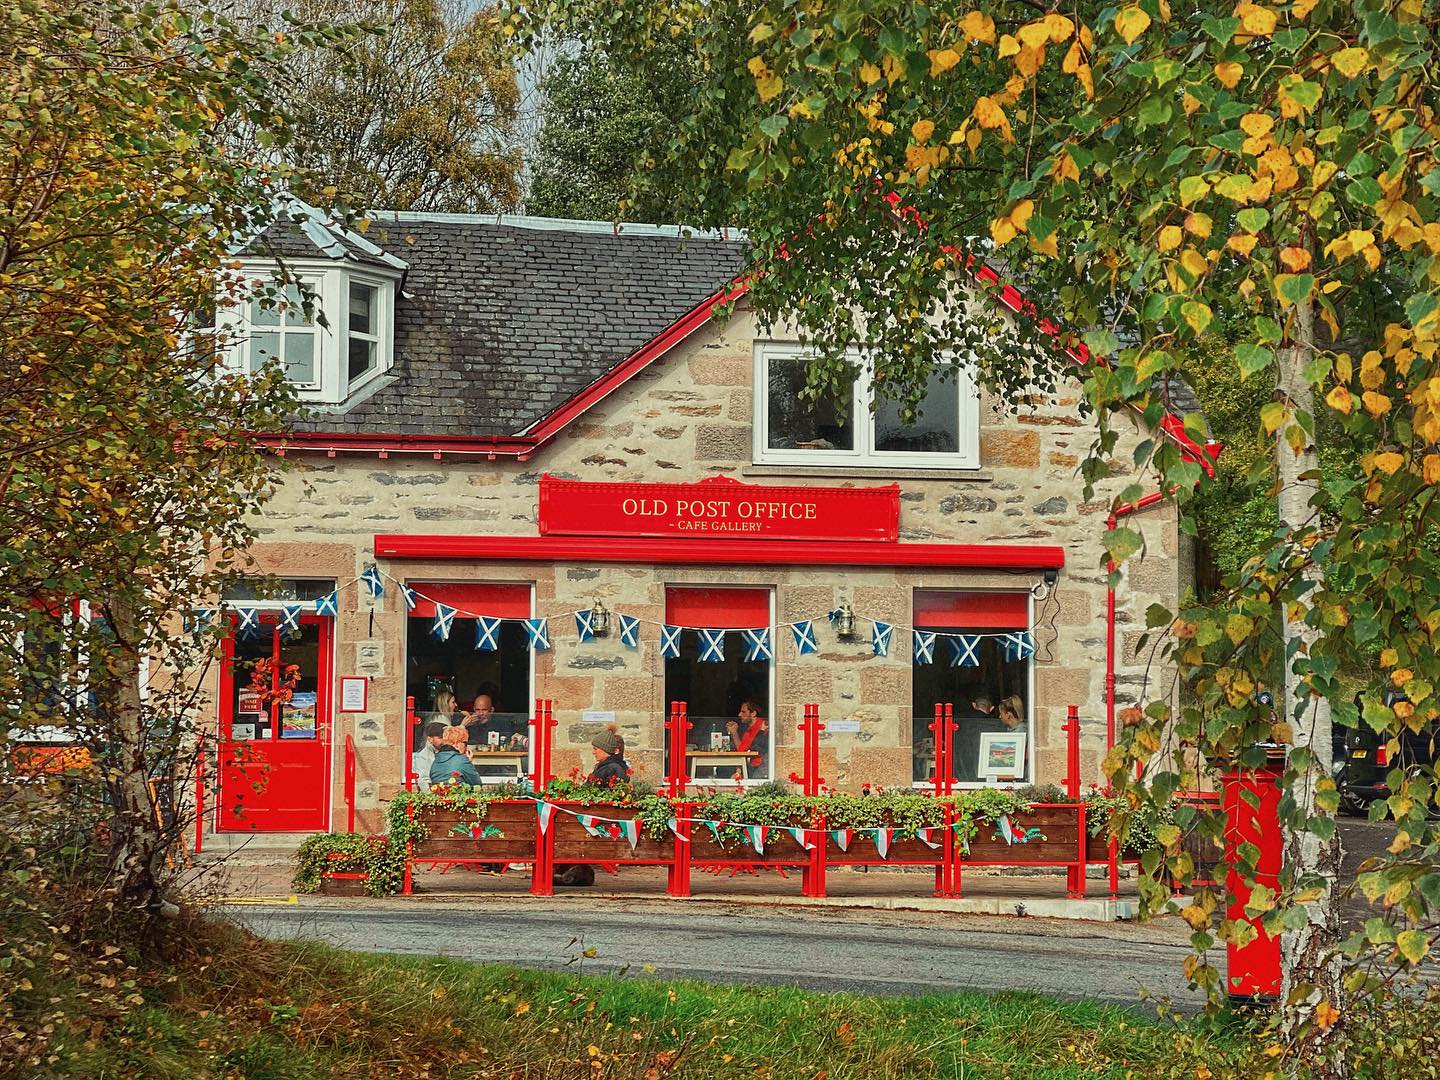 Old Post Office gallery and cafe in Kincraig